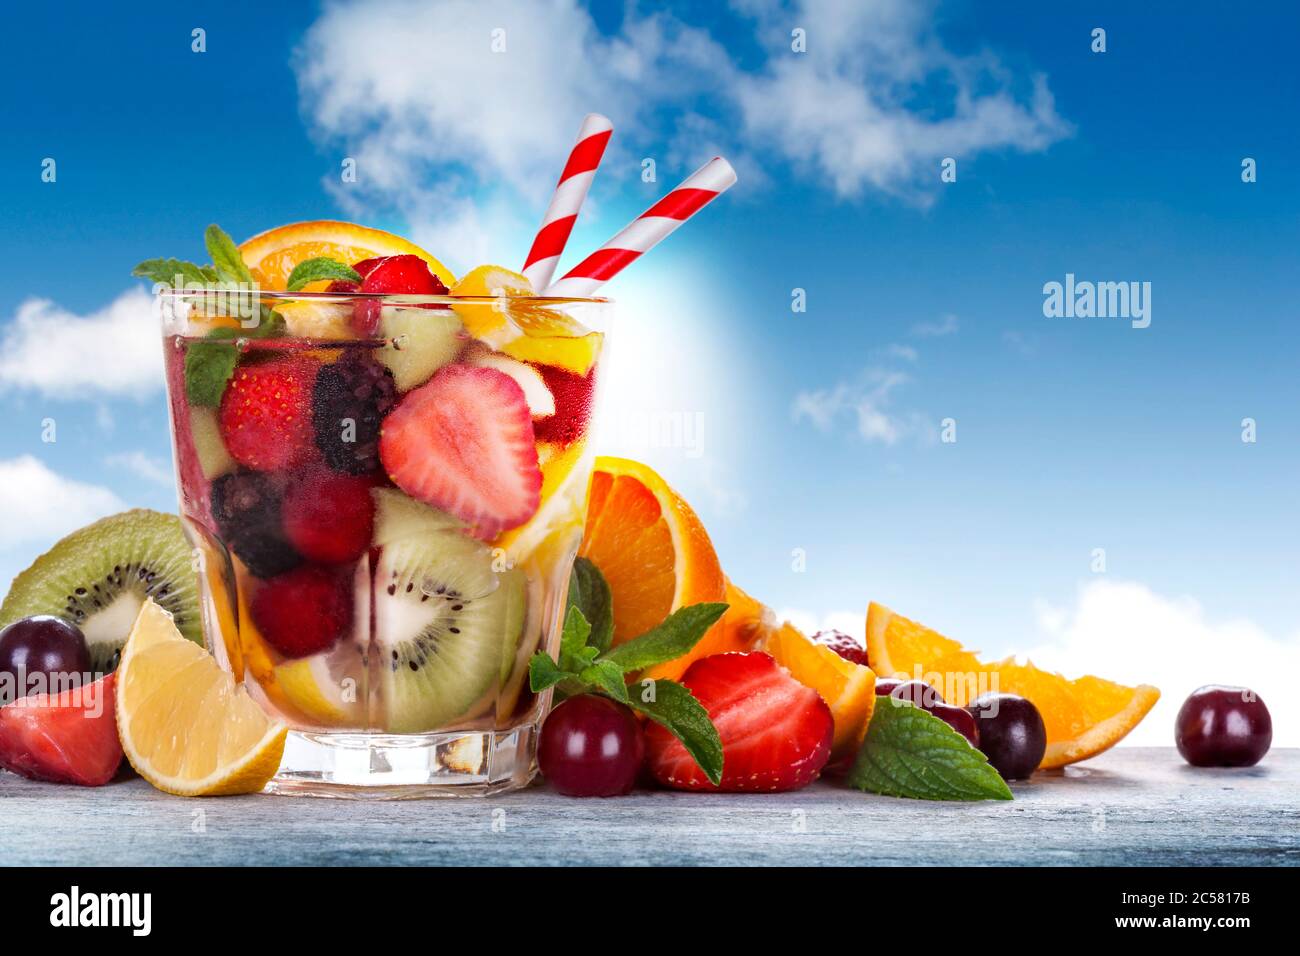 A glass filled with a mixture of summer fresh fruit. Detox and an antioxidant diet. The concept of healthy eating and lifestyle. Stock Photo